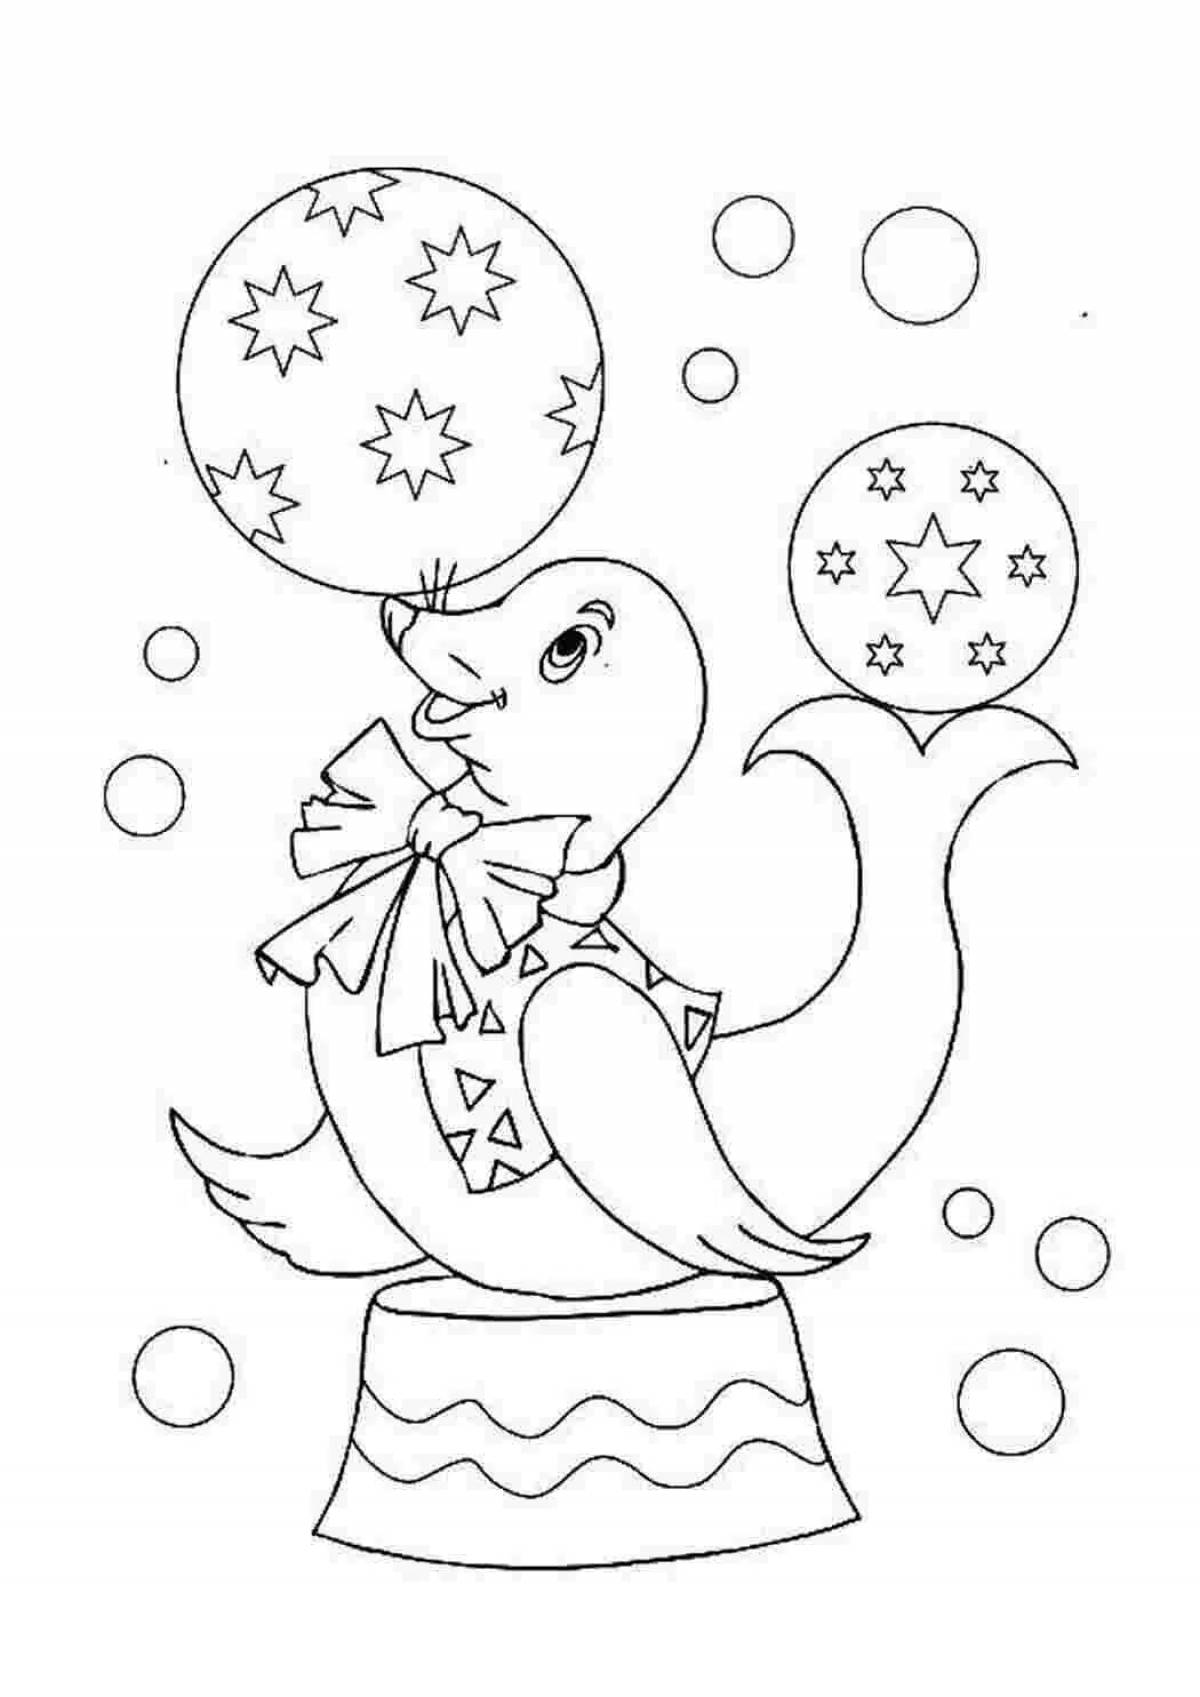 Coloring page funny circus